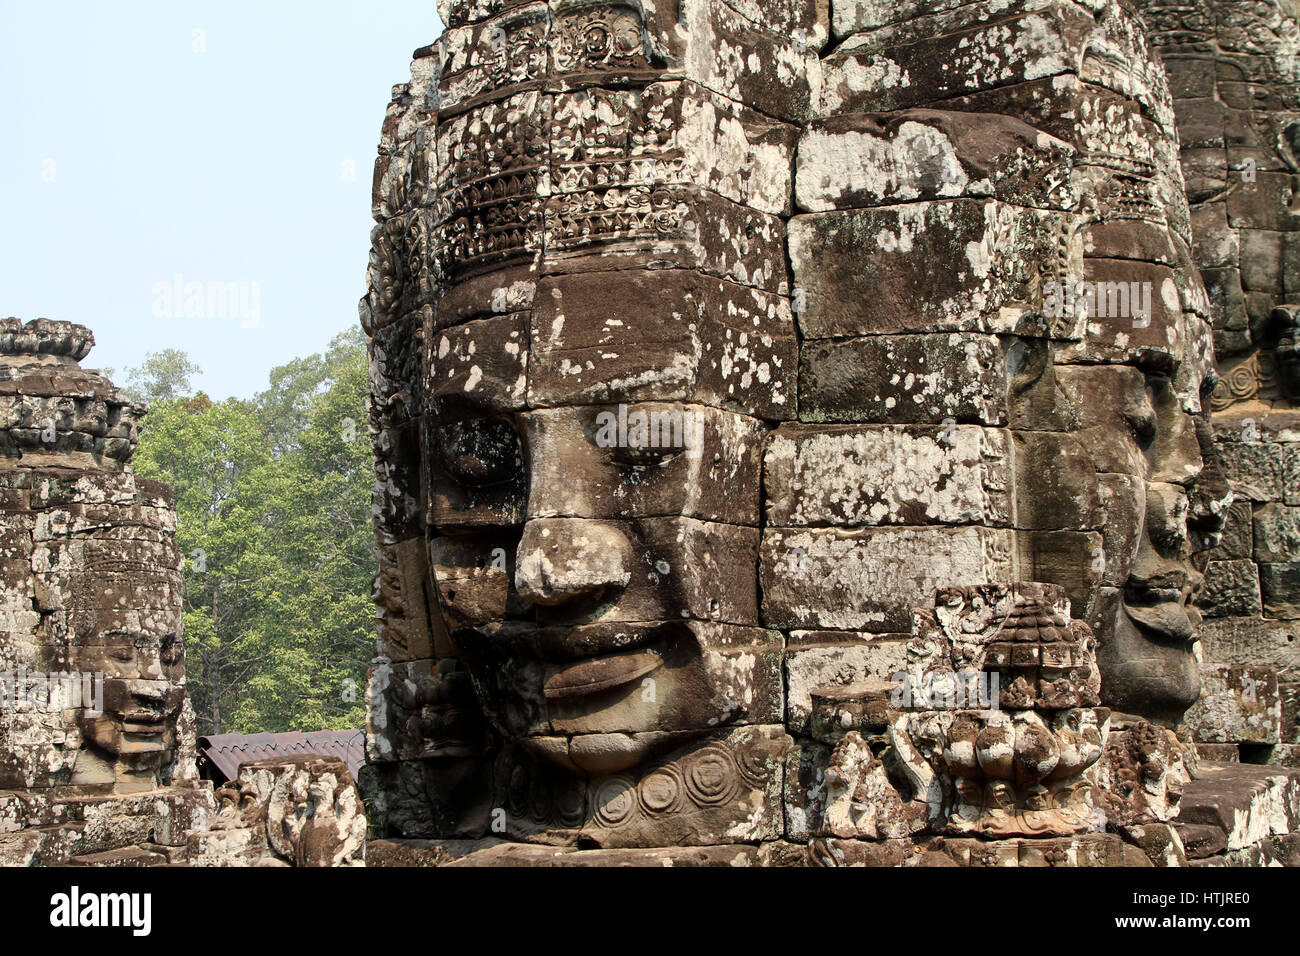 The iconic smiling faces of the Bayon temple in Angkor Thom, the former capital of the Khmer empire outside modern-day Siem Reap, Cambodia. Stock Photo